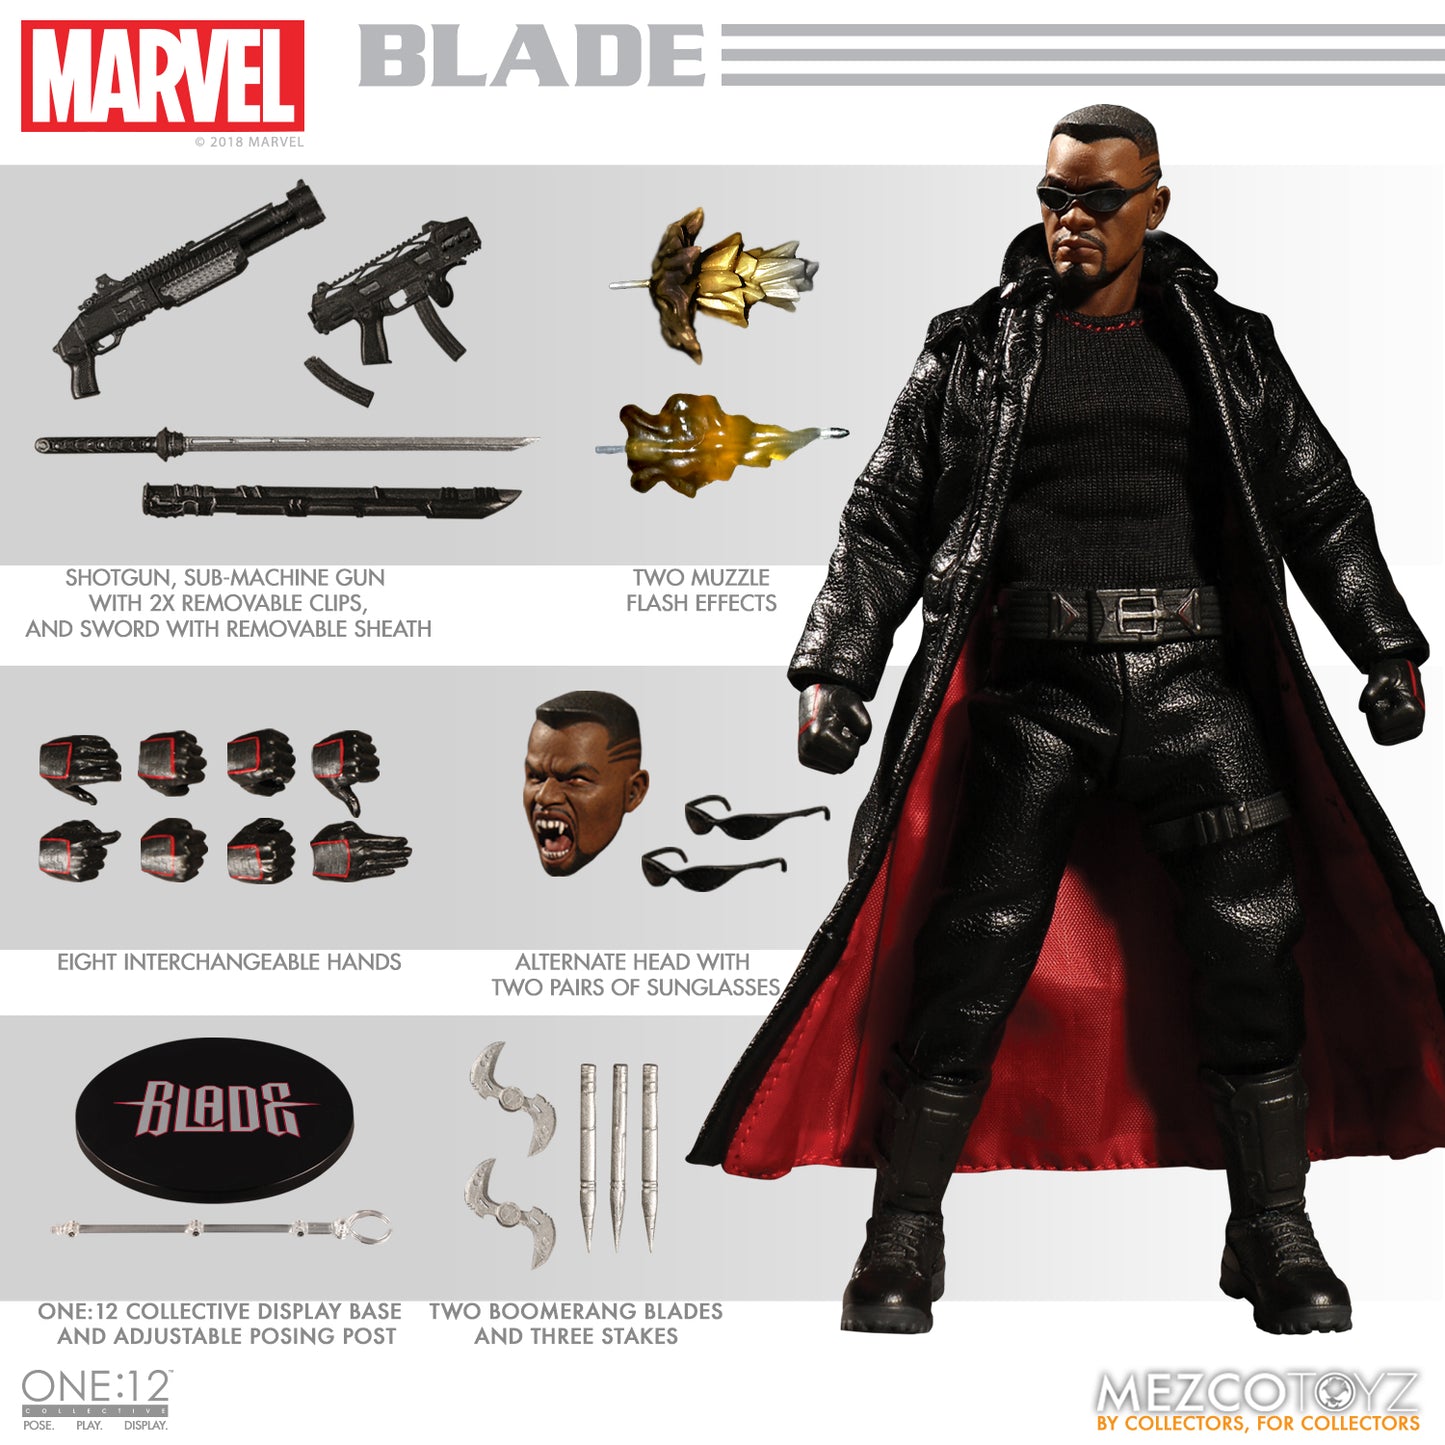 Marvel One:12 Collective Blade